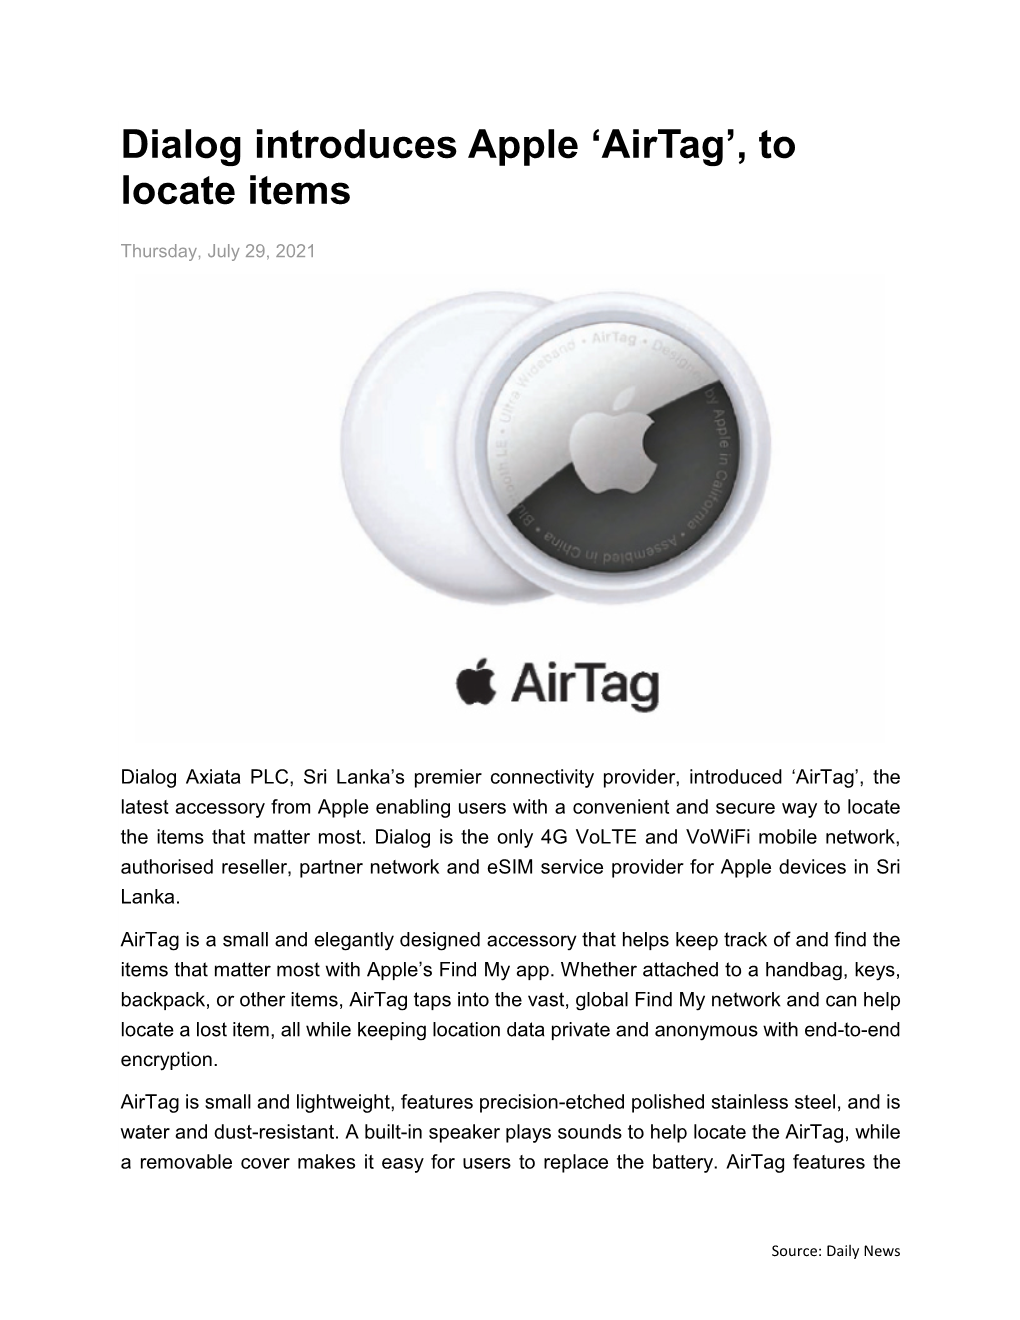 Dialog Introduces Apple 'Airtag', to Locate Items